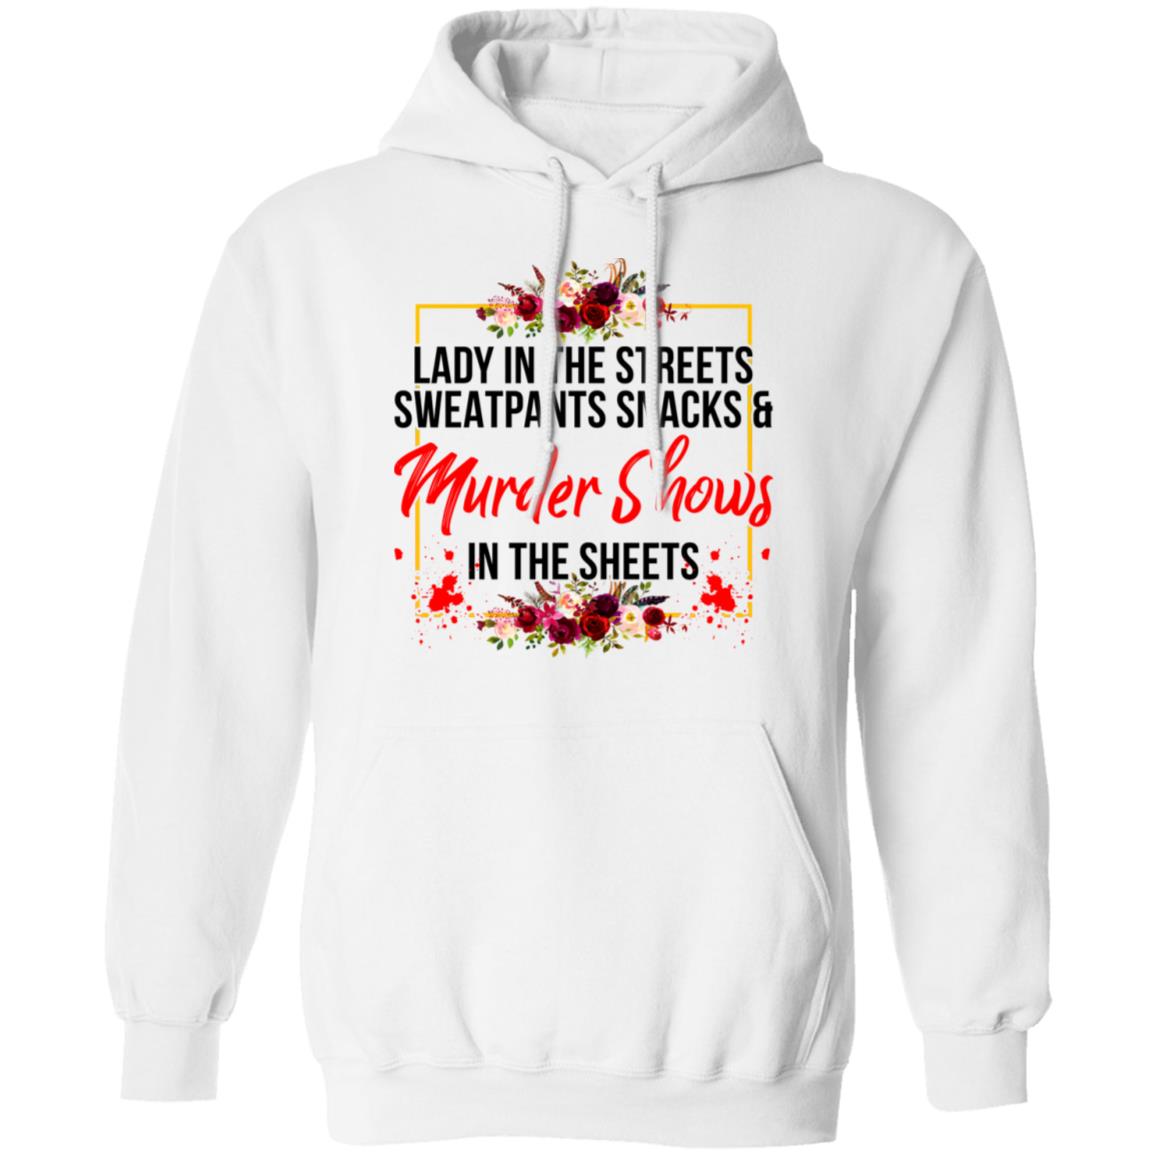 Lady In The Streets Sweatpants Snacks And Murder Shows Shirt - Lelemoon